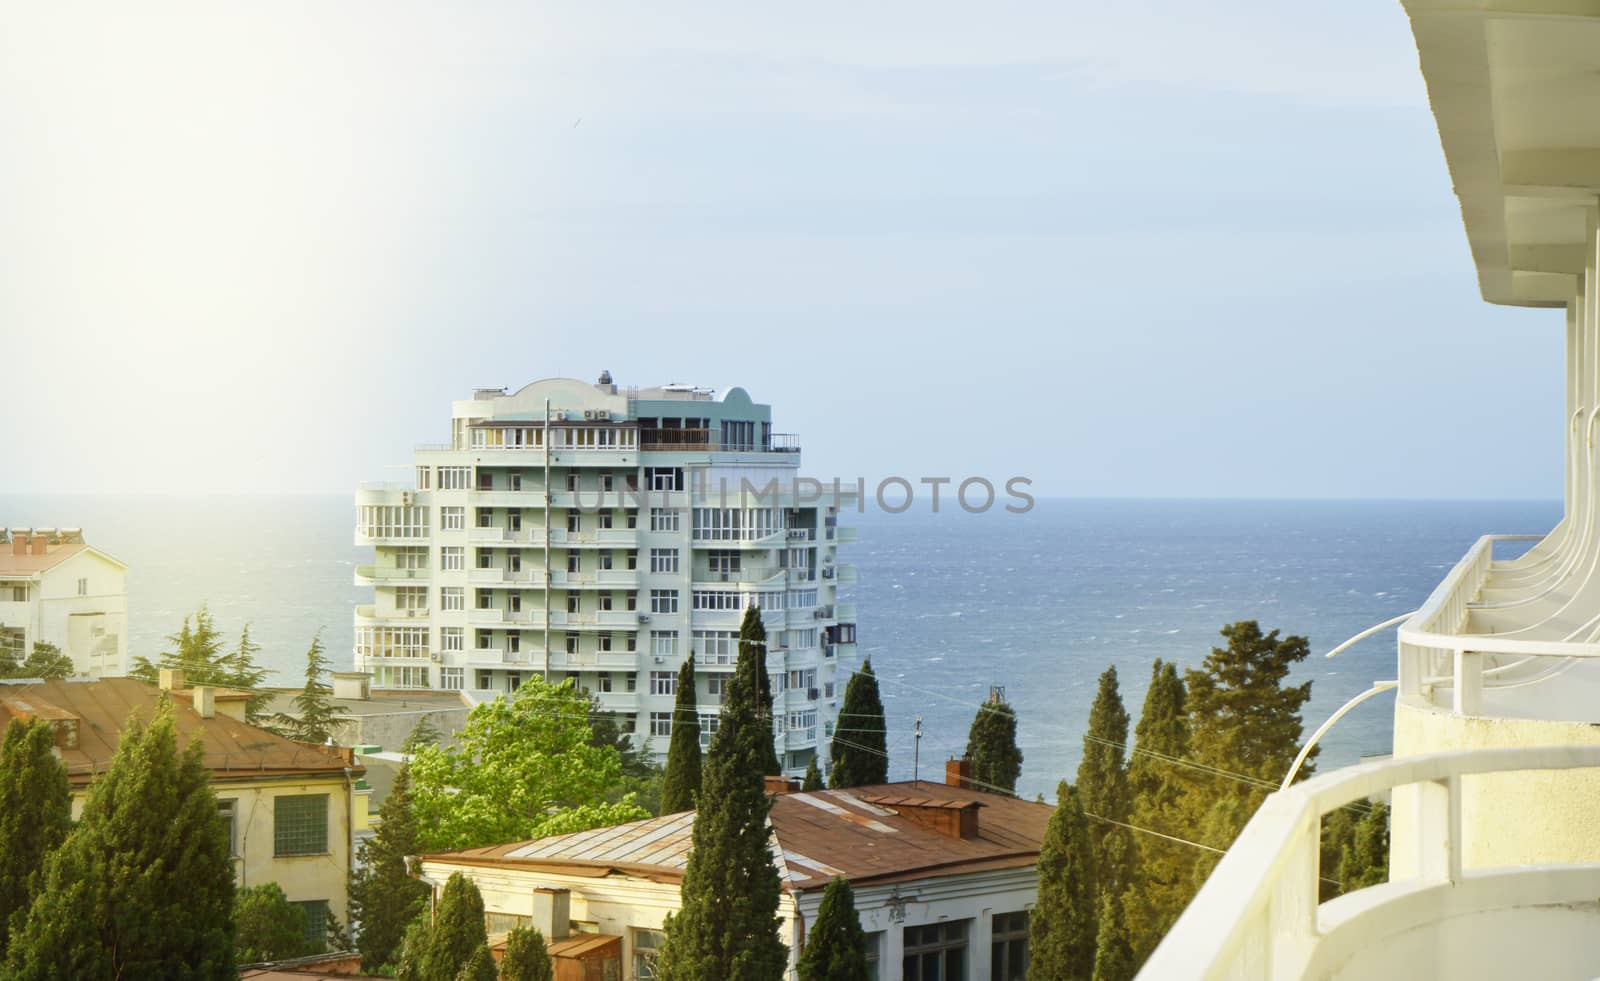 Sea view and hotel buildings from the balcony, early morning by claire_lucia